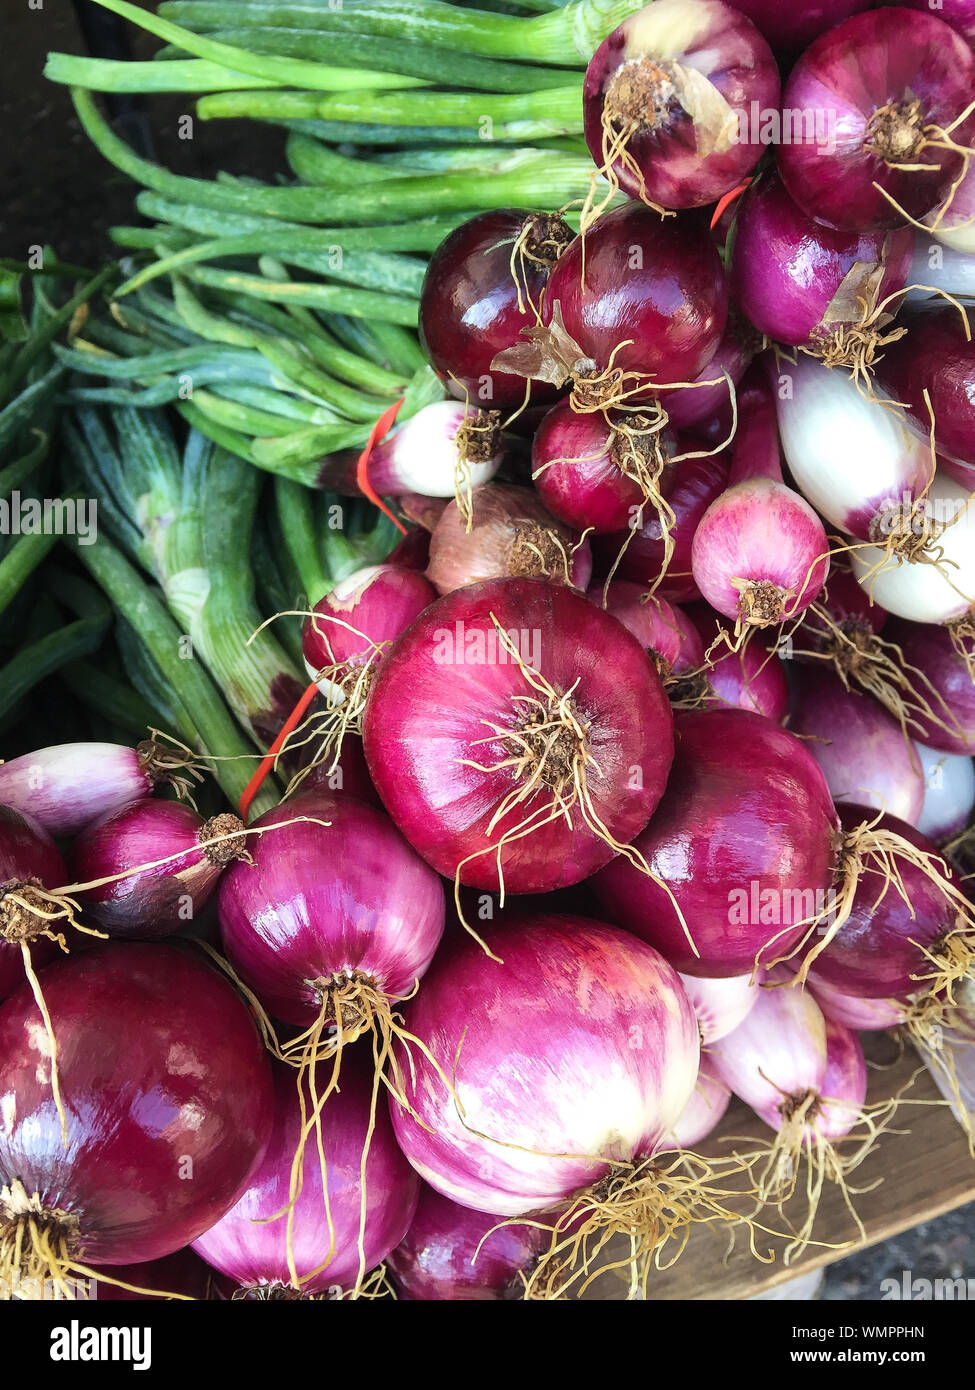 Close-up Of Scallions For Sale At Market Stock Photo